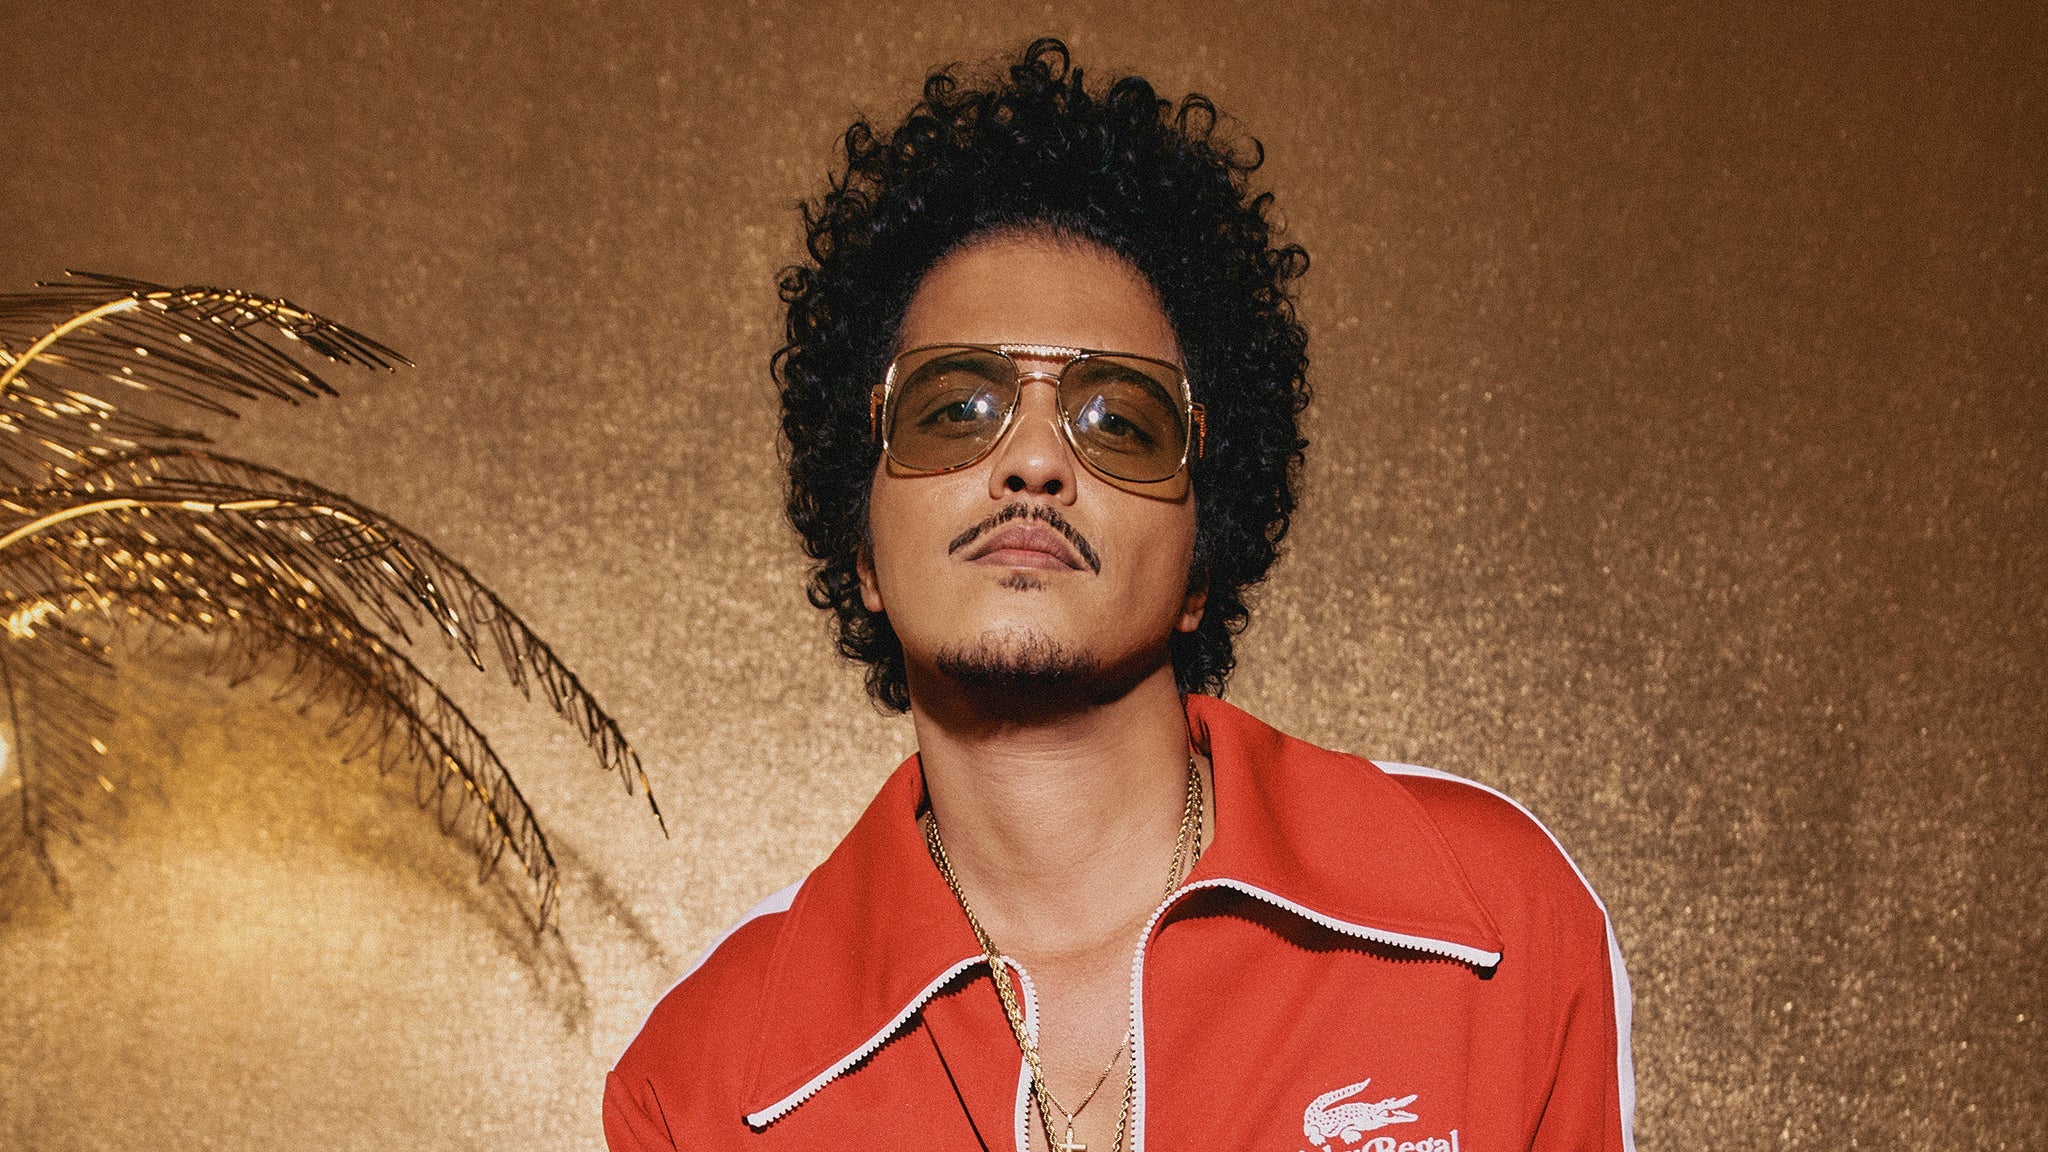 members only presale password for Bruno Mars face value tickets in National Harbor 